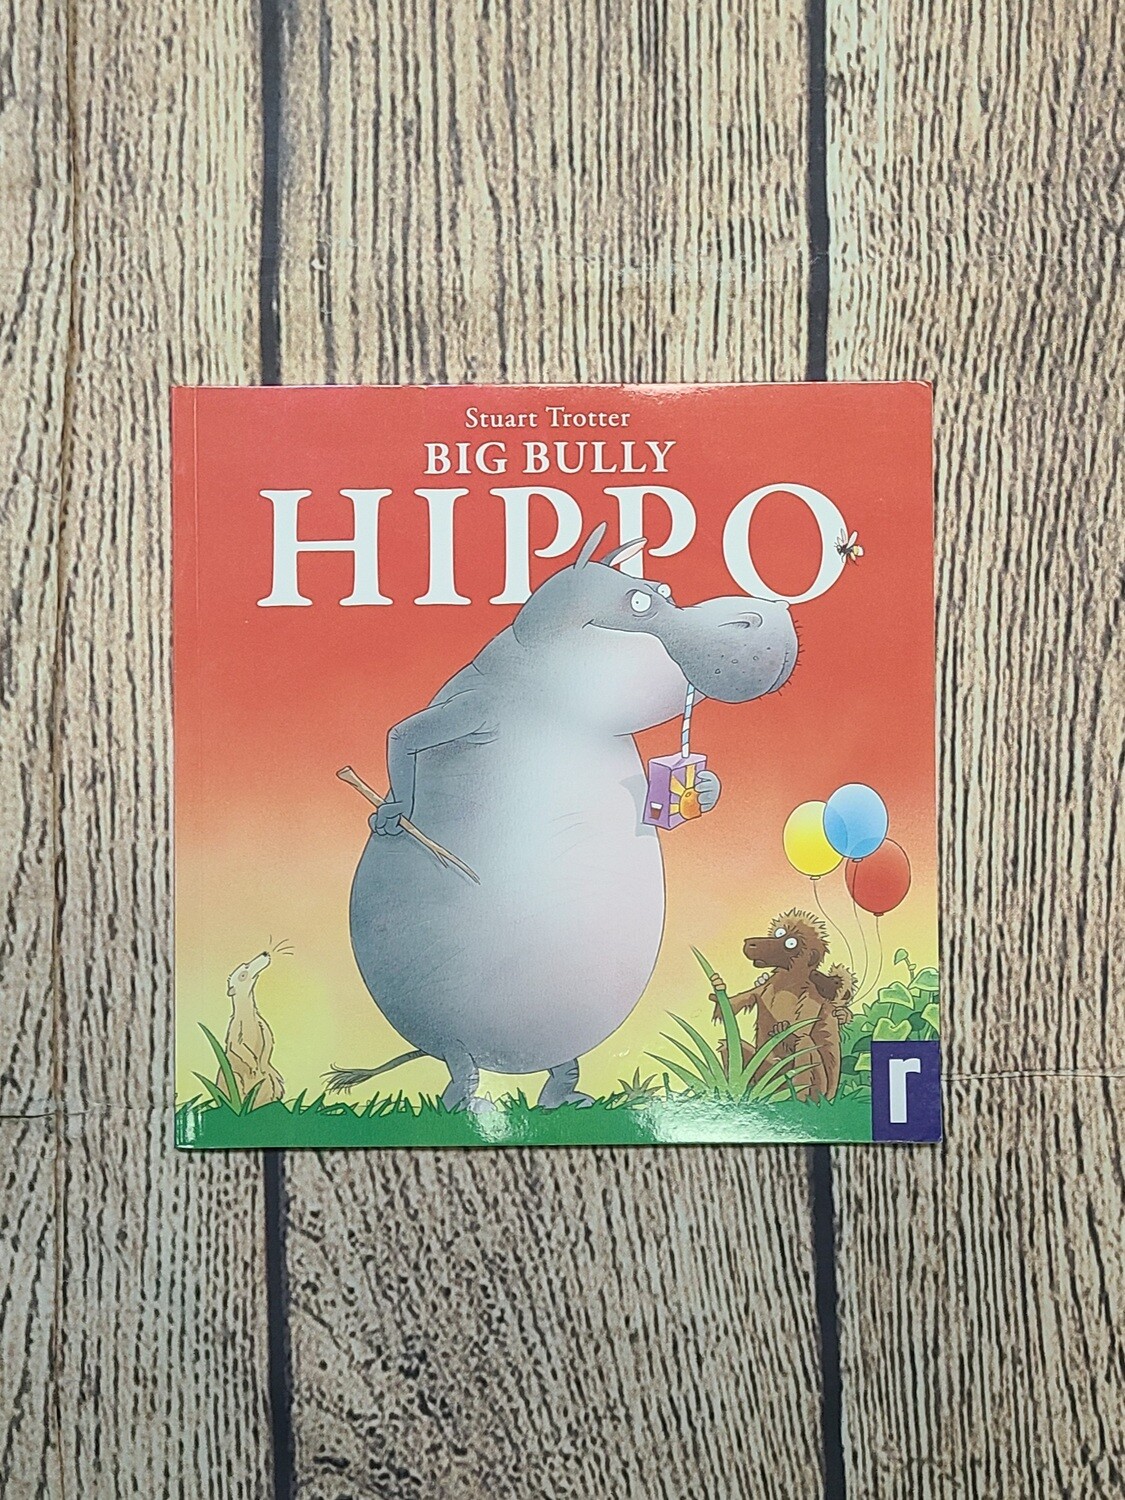 Big Bully Hippo by Stuart Trotter - Paperback - Great Condition